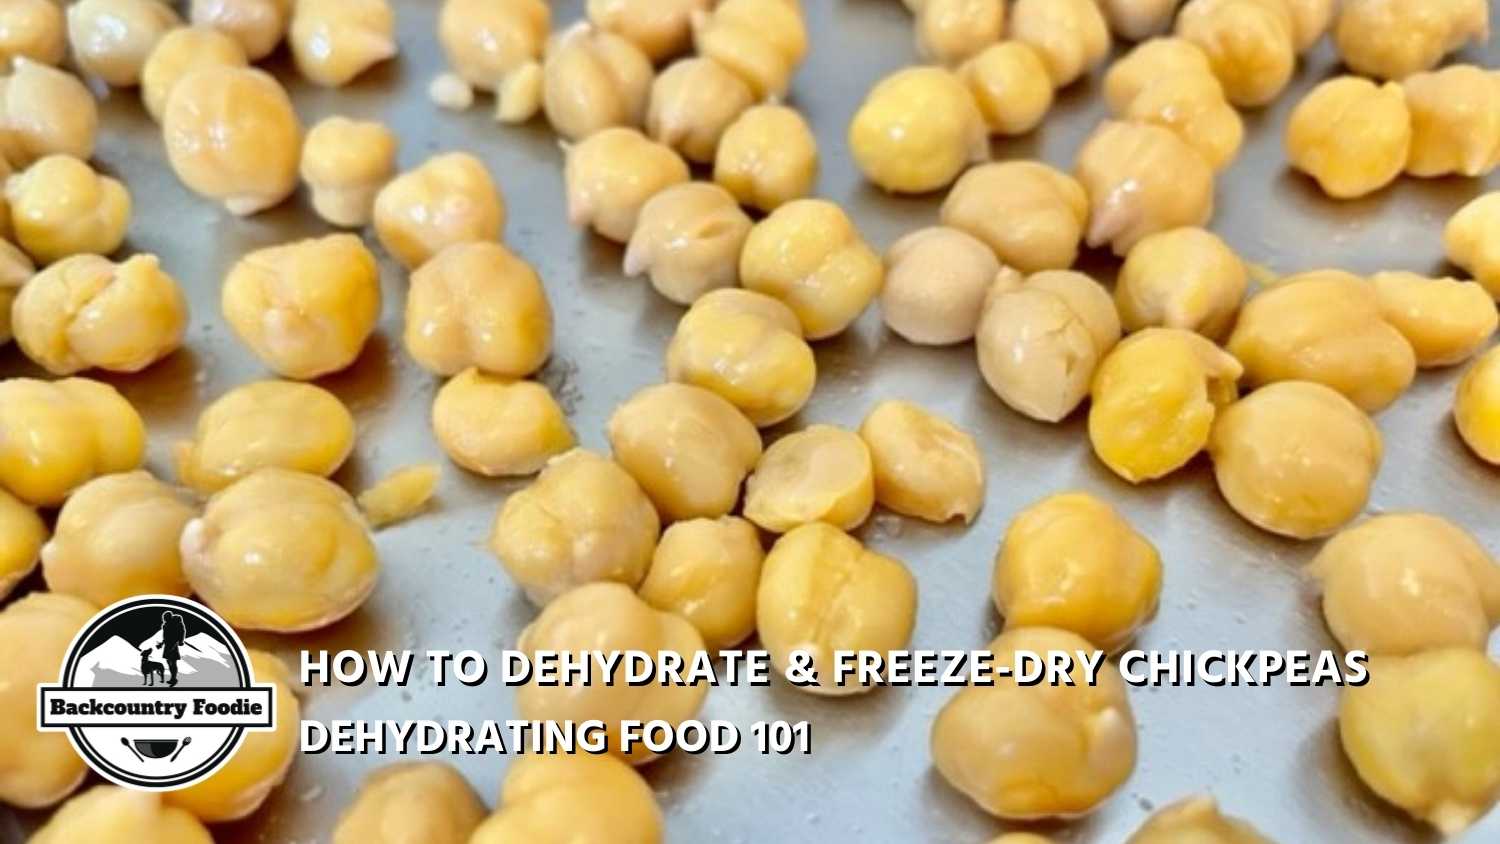 How to dehydrate freeze dry chickpeas cover image thumbnail